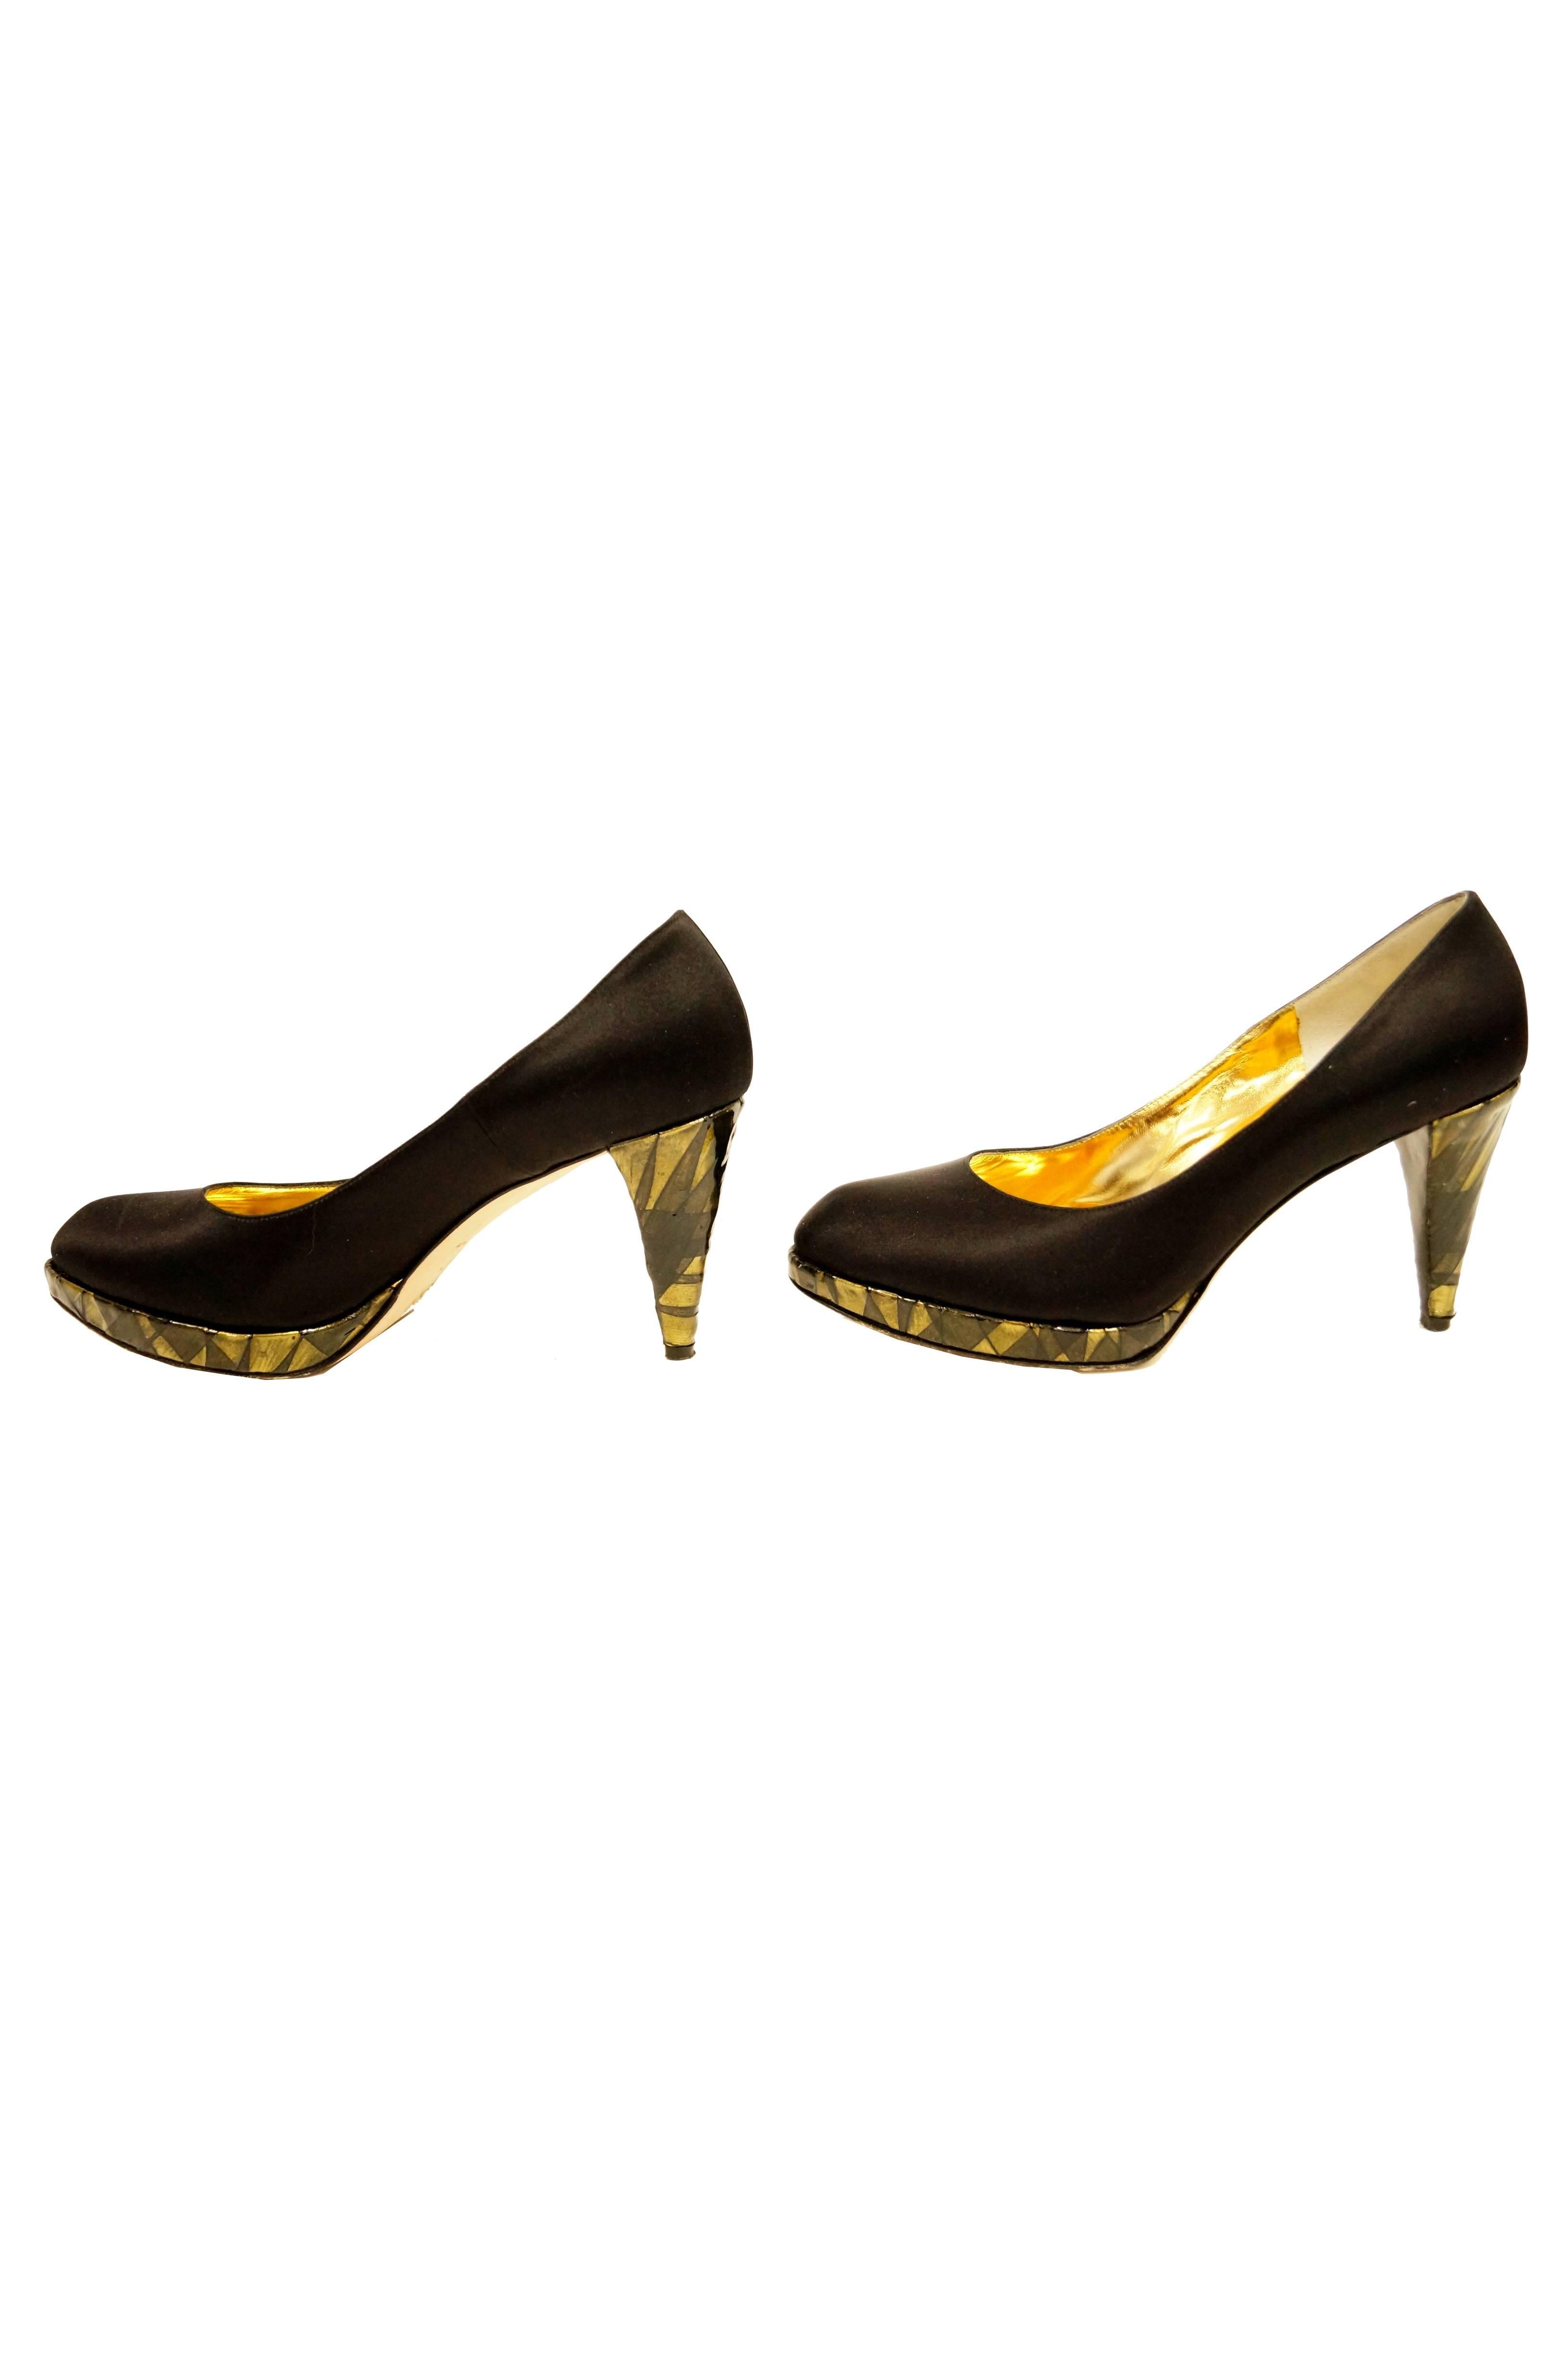 Women's Rodo Black Satin Pumps with Gold Stained Glass Style Heel, 1980s For Sale